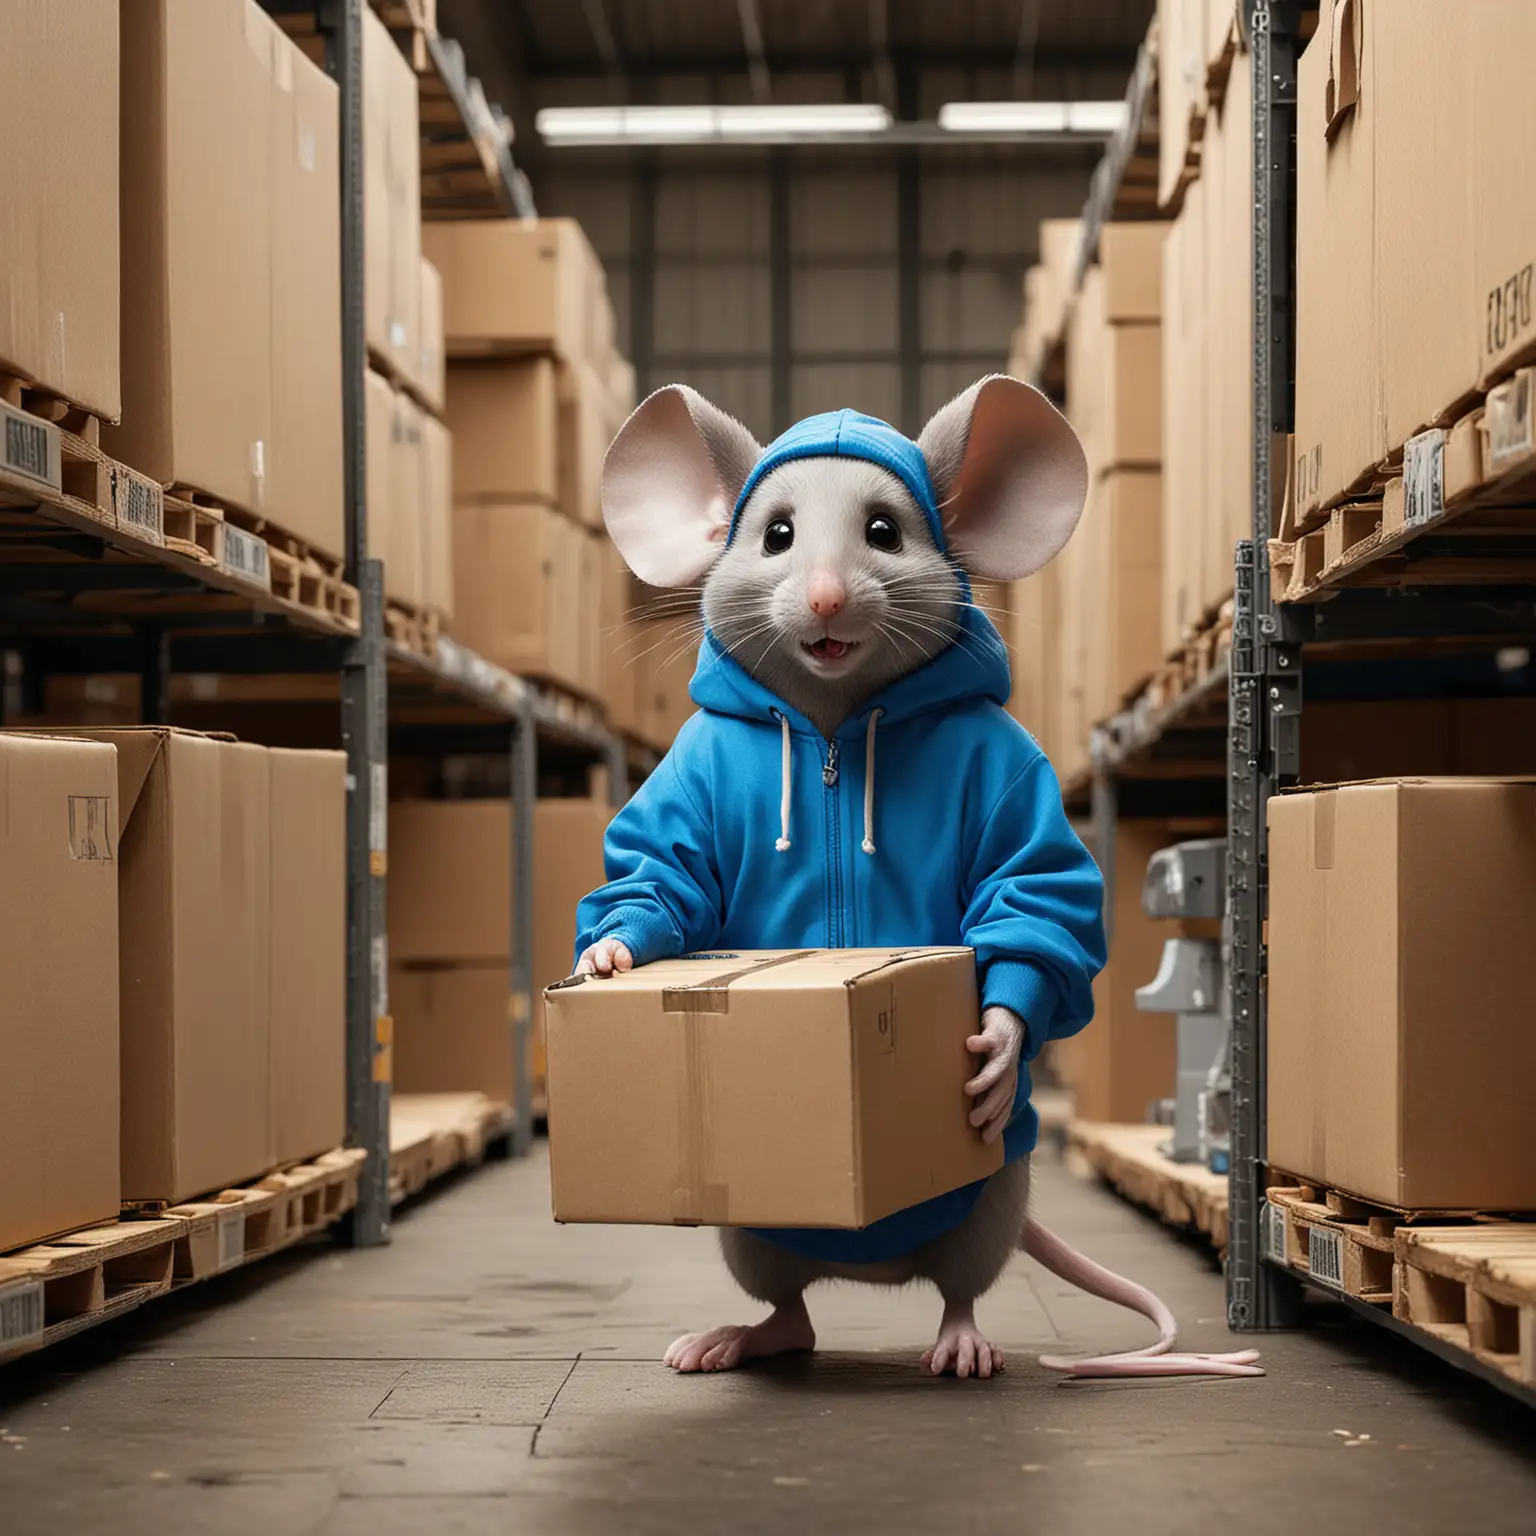 Big Mouse in Blue Hoody Loading Boxes in Warehouse